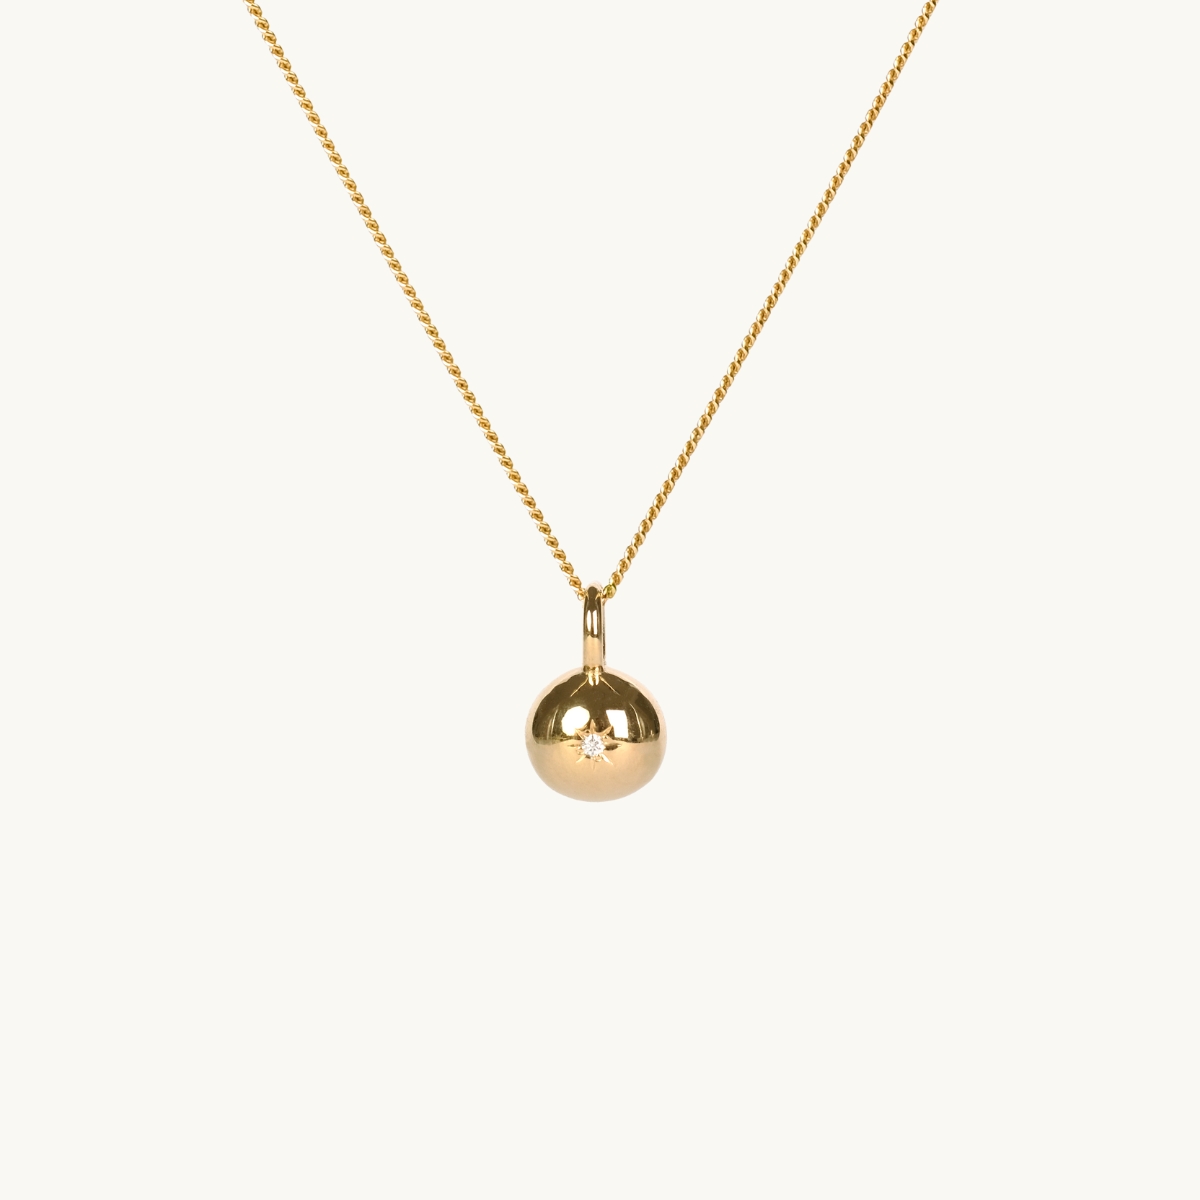 A round pendant in gold with a white diamond on a gold chain